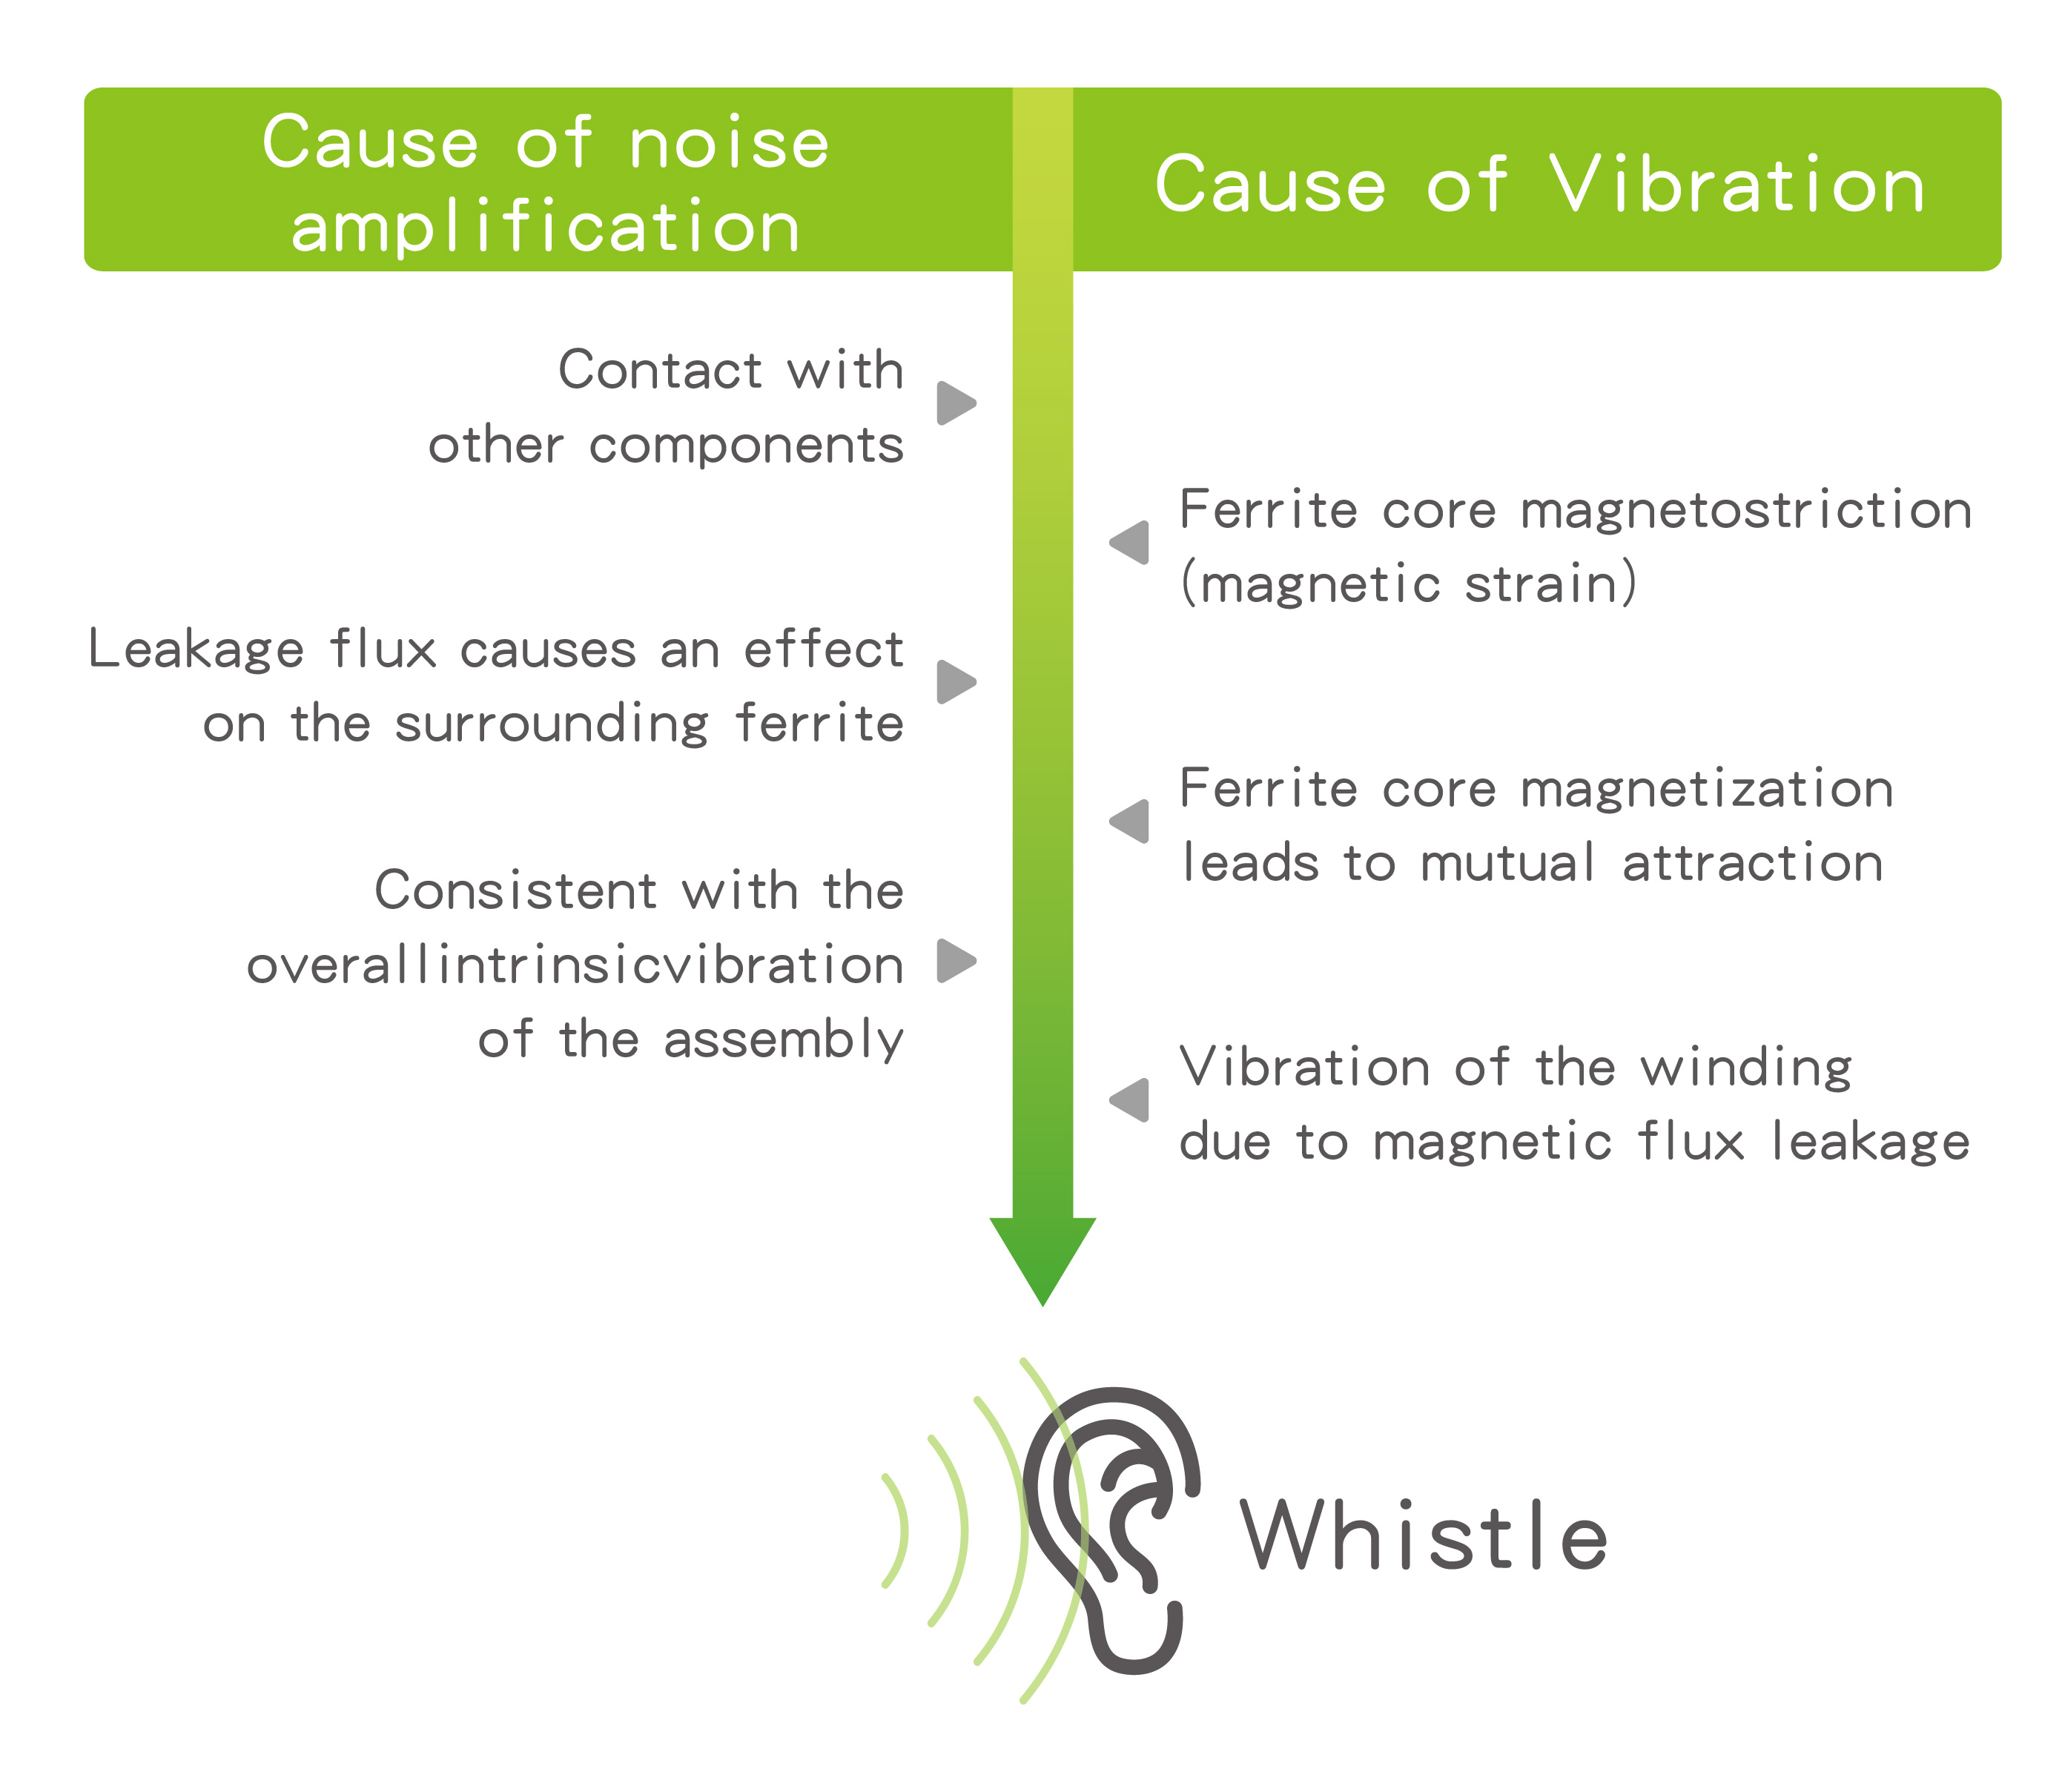 Causes of whistling and amplification of acoustic noise of power inductors